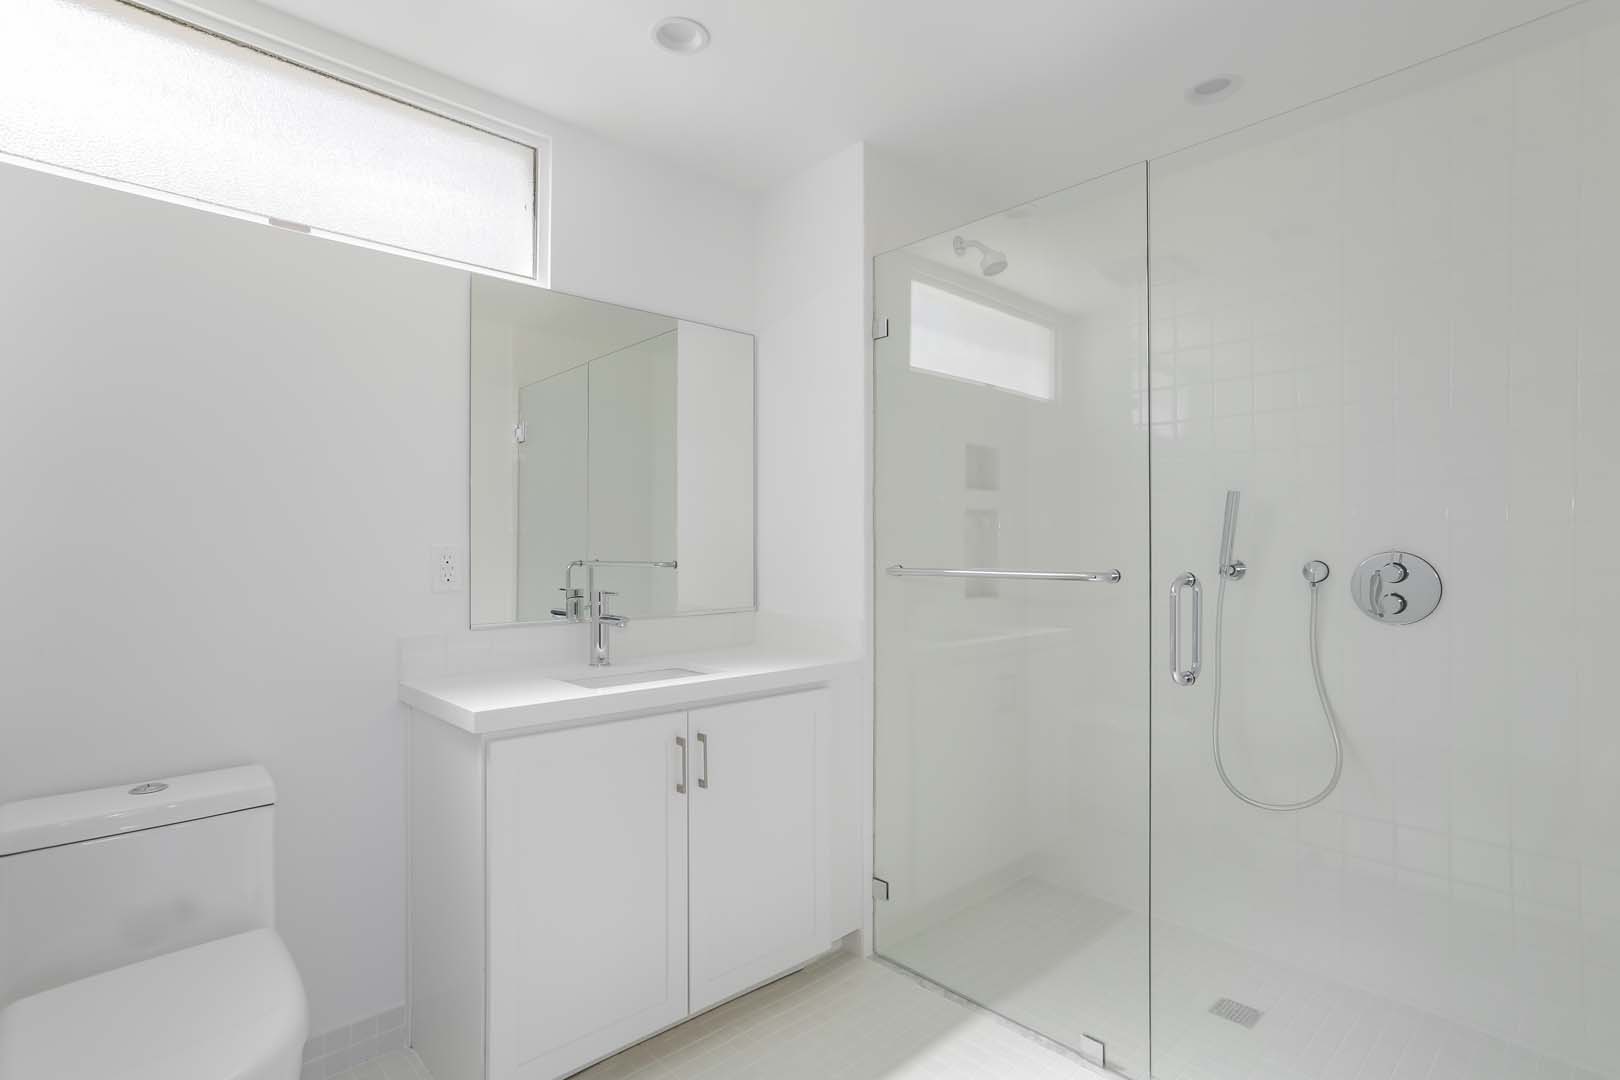 Culver City CA Apartments for Rent - Sleek and Modern Bathroom with White Interiors and Shower with Glass Door